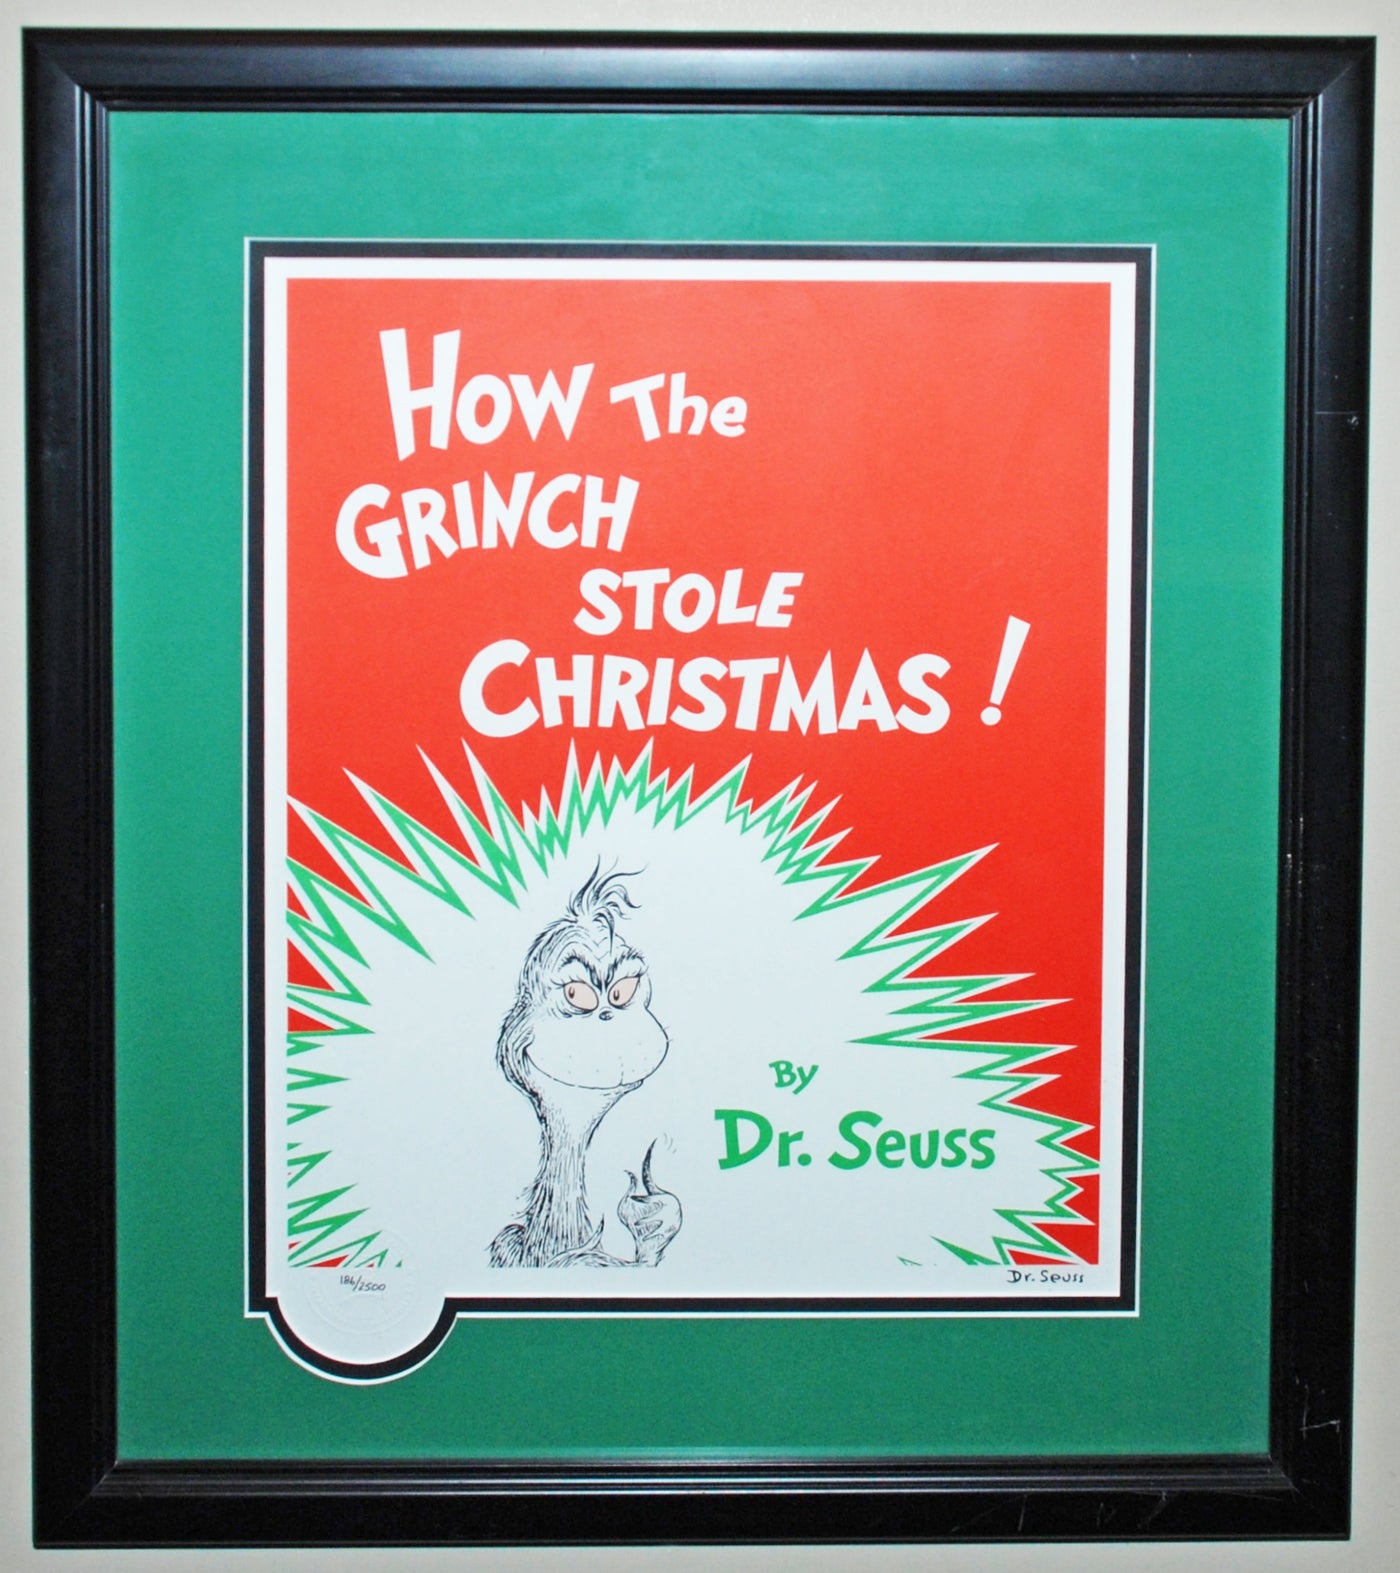 Original Chuck Jones Limited Edition Lithograph, How the Grinch Stole Christmas Book Cover